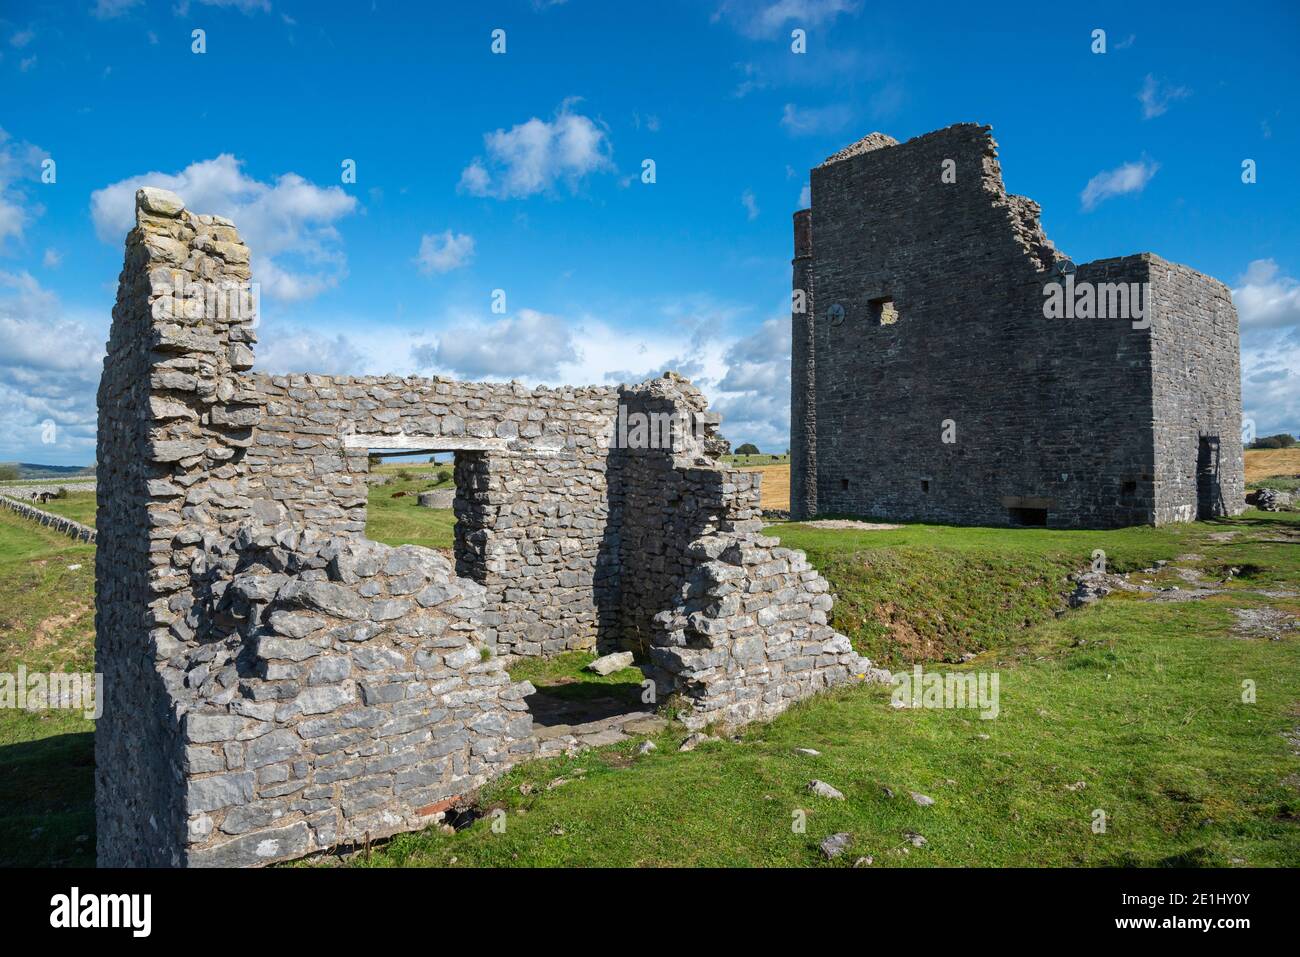 Magpie Mine, Sheldon, Peak District, Derbyshire, England. A disused lead mine with 200 years of history. Stock Photo